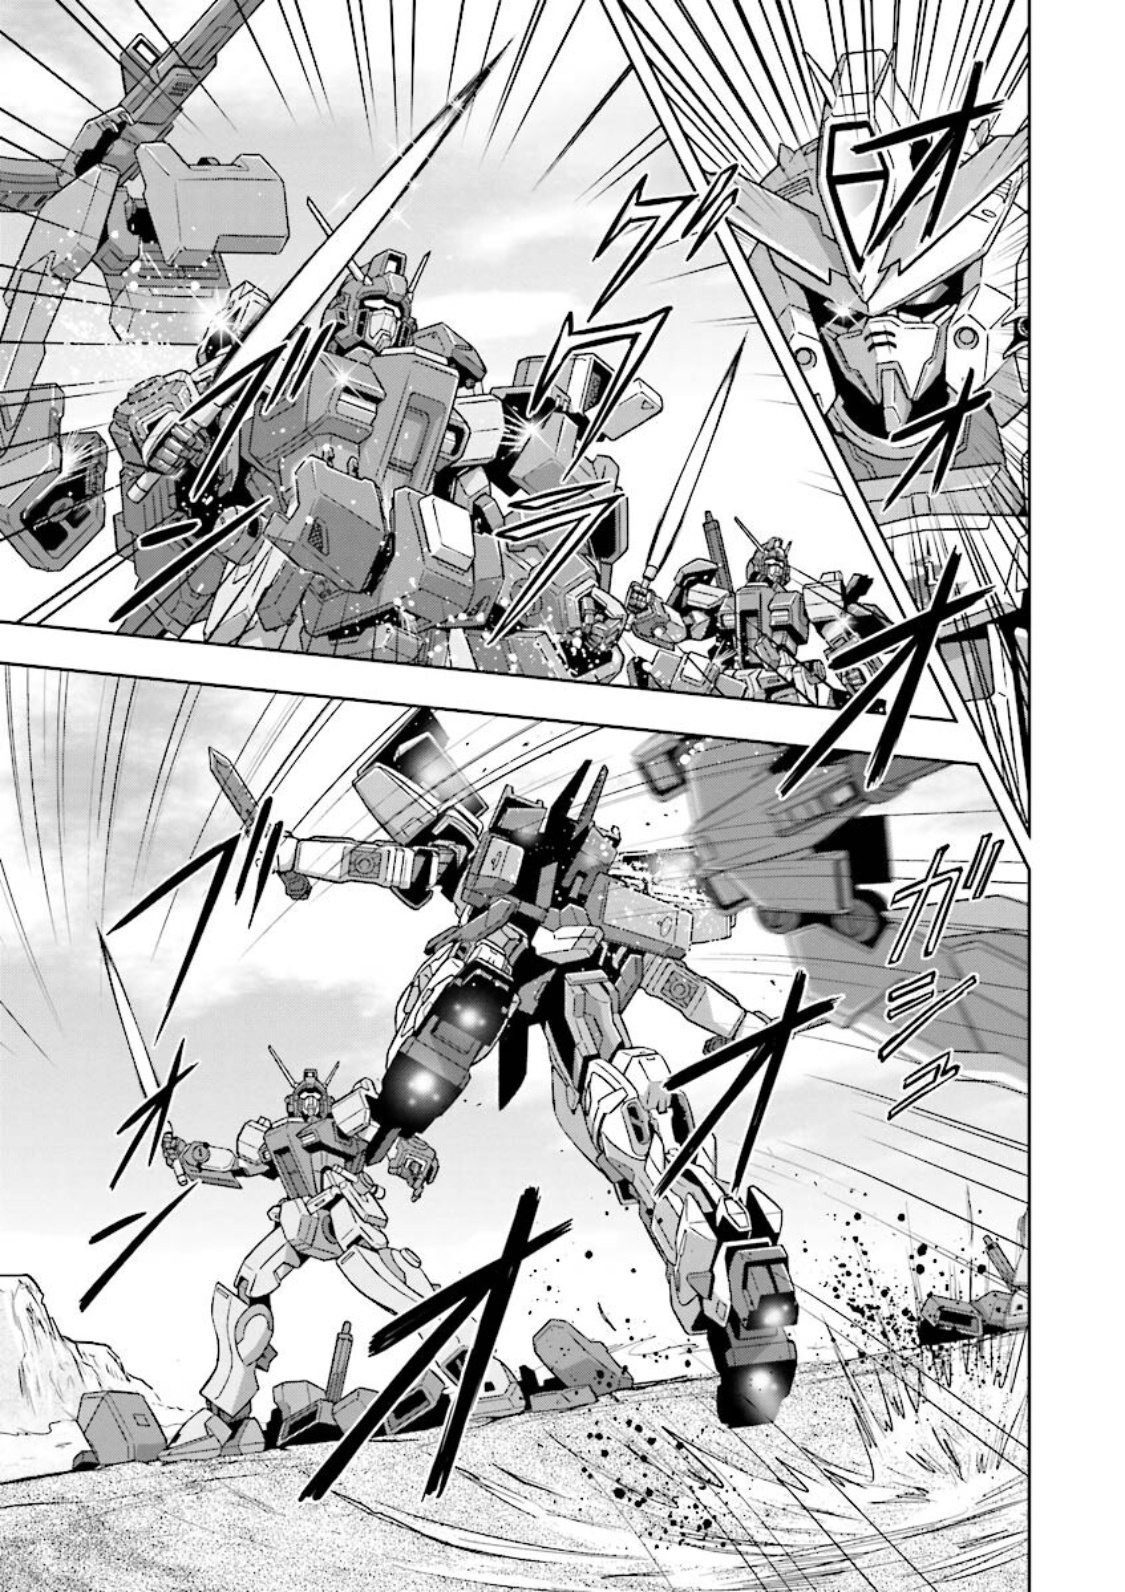 Mobile Suit Gundam Seed Astray Re:master Edition Chapter 12.5 #9